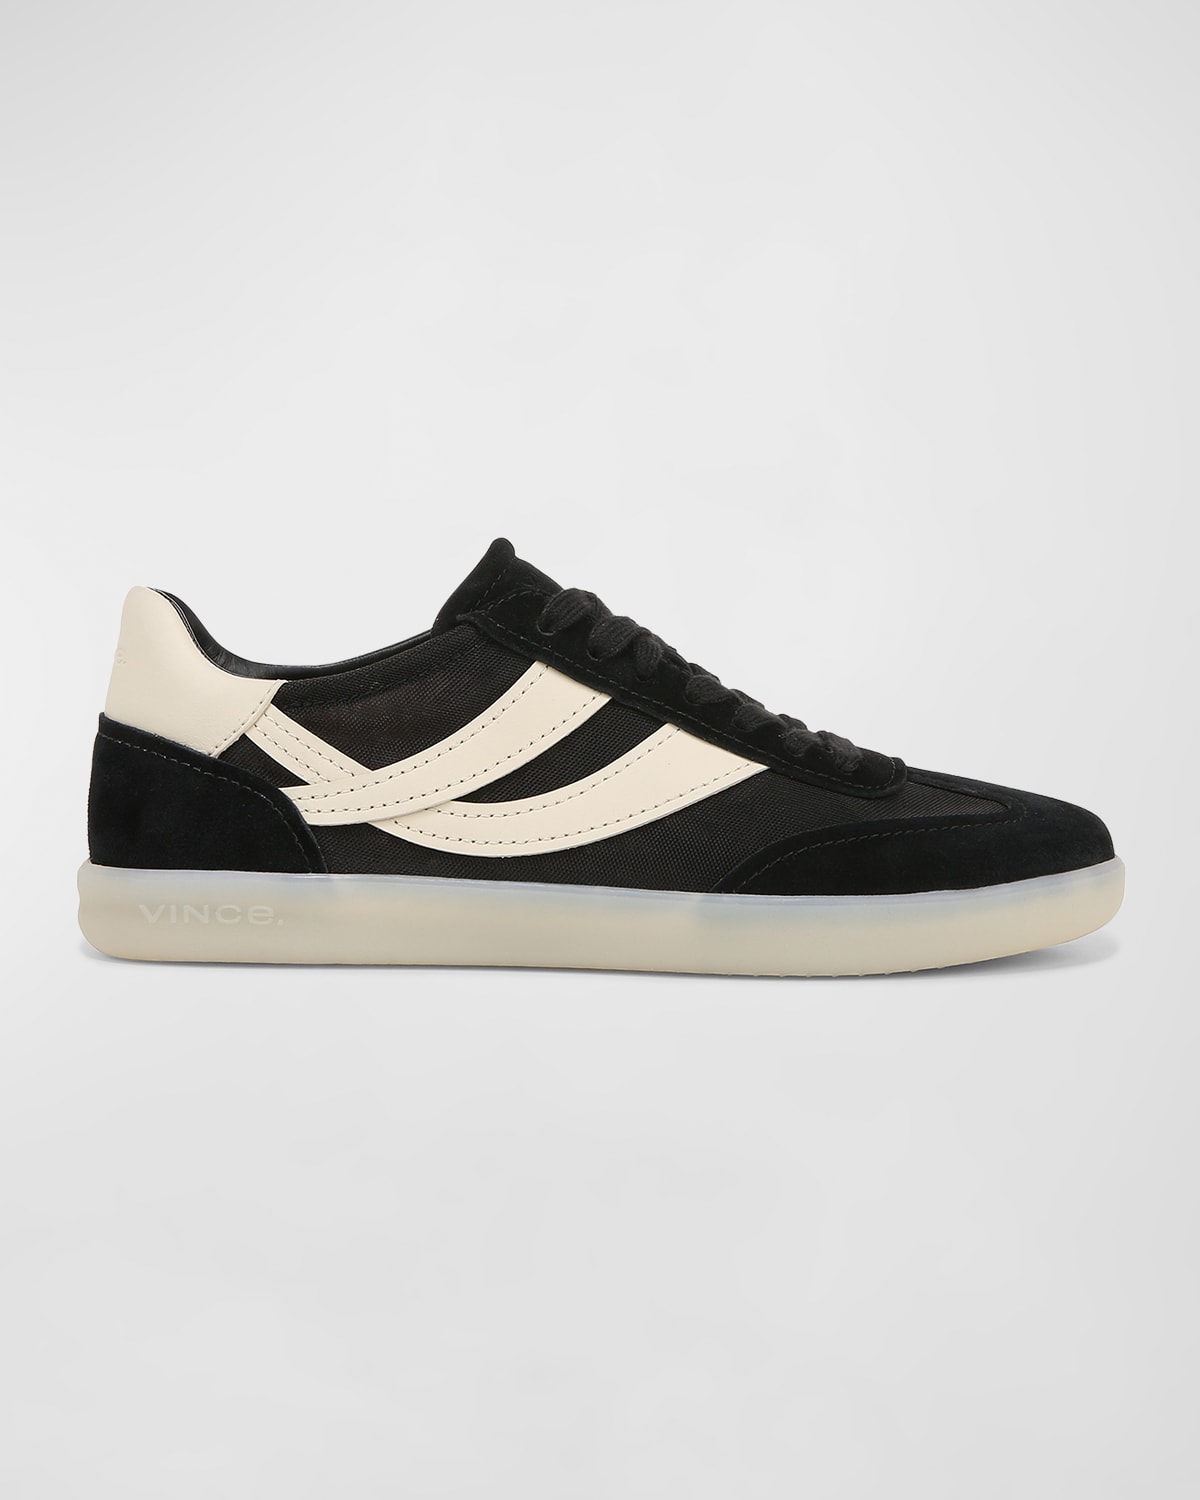 Vince Oasis Mixed Leather Retro Sneakers In Black Suede